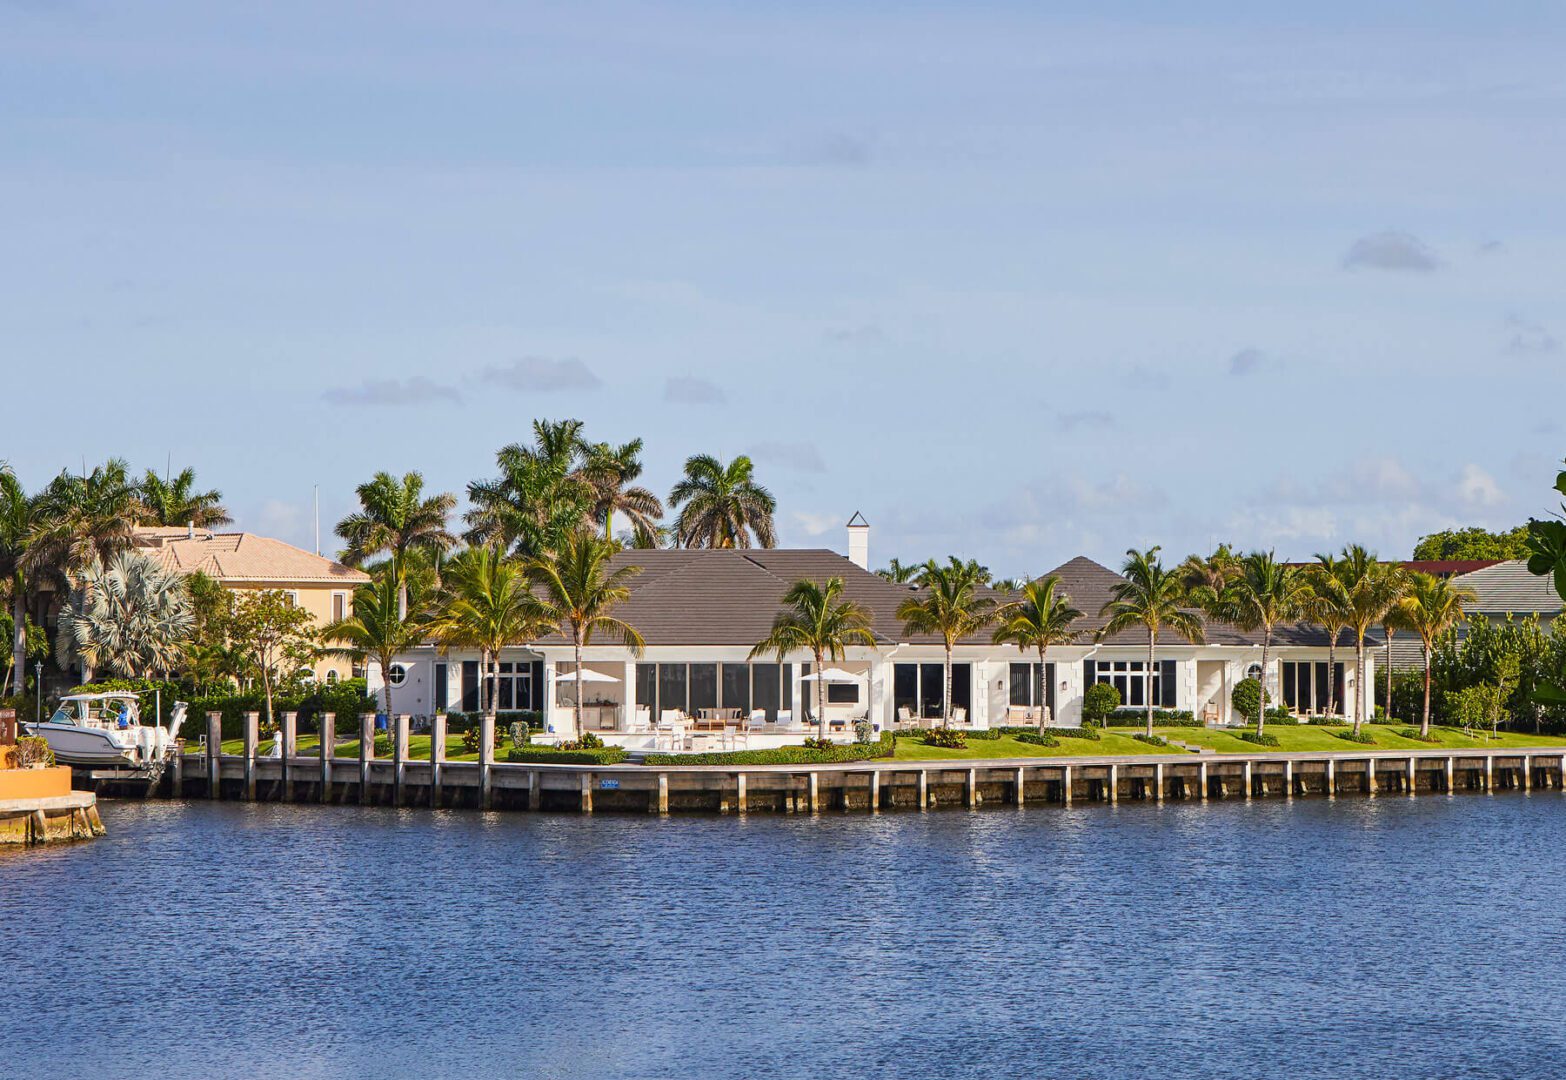 A large house on the water with palm trees.